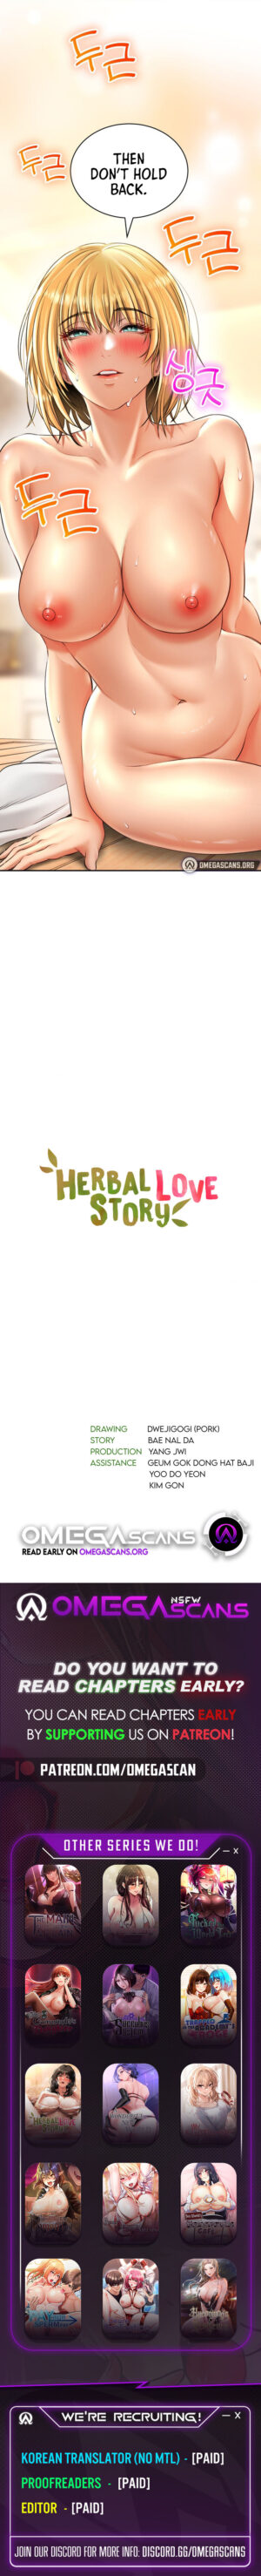 [Lee Juwon] Herbal Love Story (1-18) [English] [Omega Scans] [Ongoing]